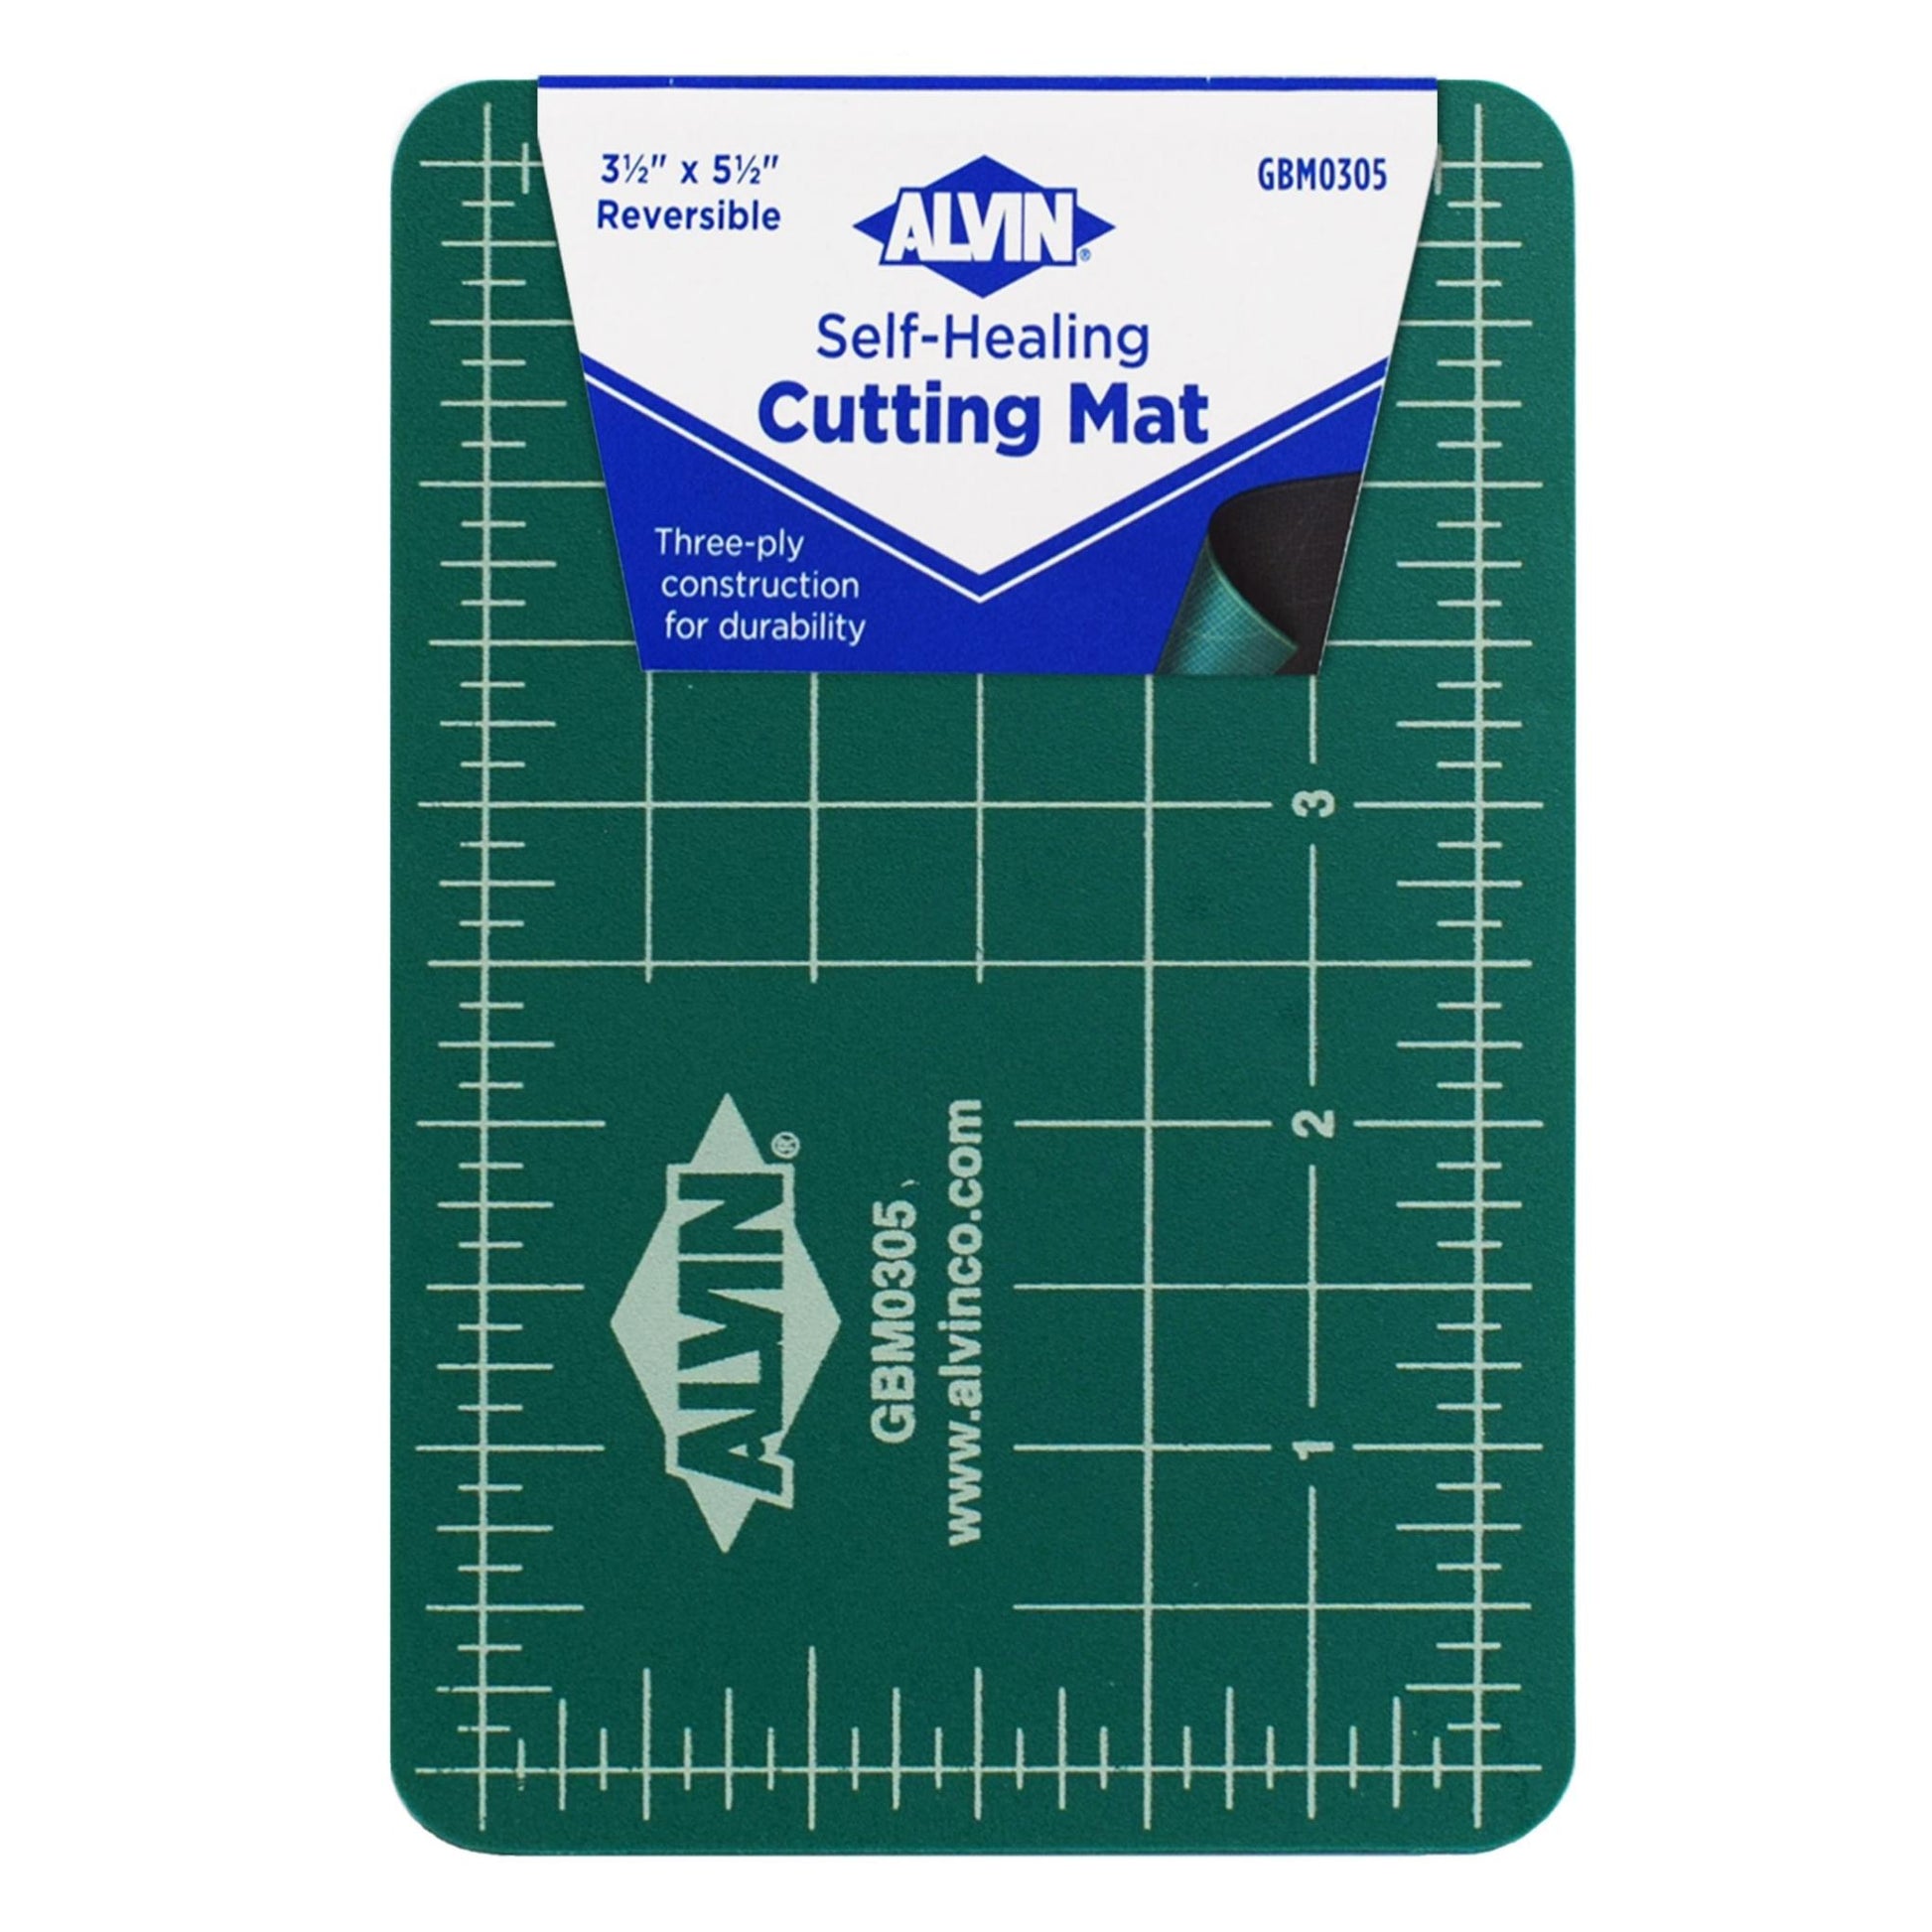 Alvin GB-0912 9 x 12 in. Self-Healing Double Sided Cutting Mats, 1